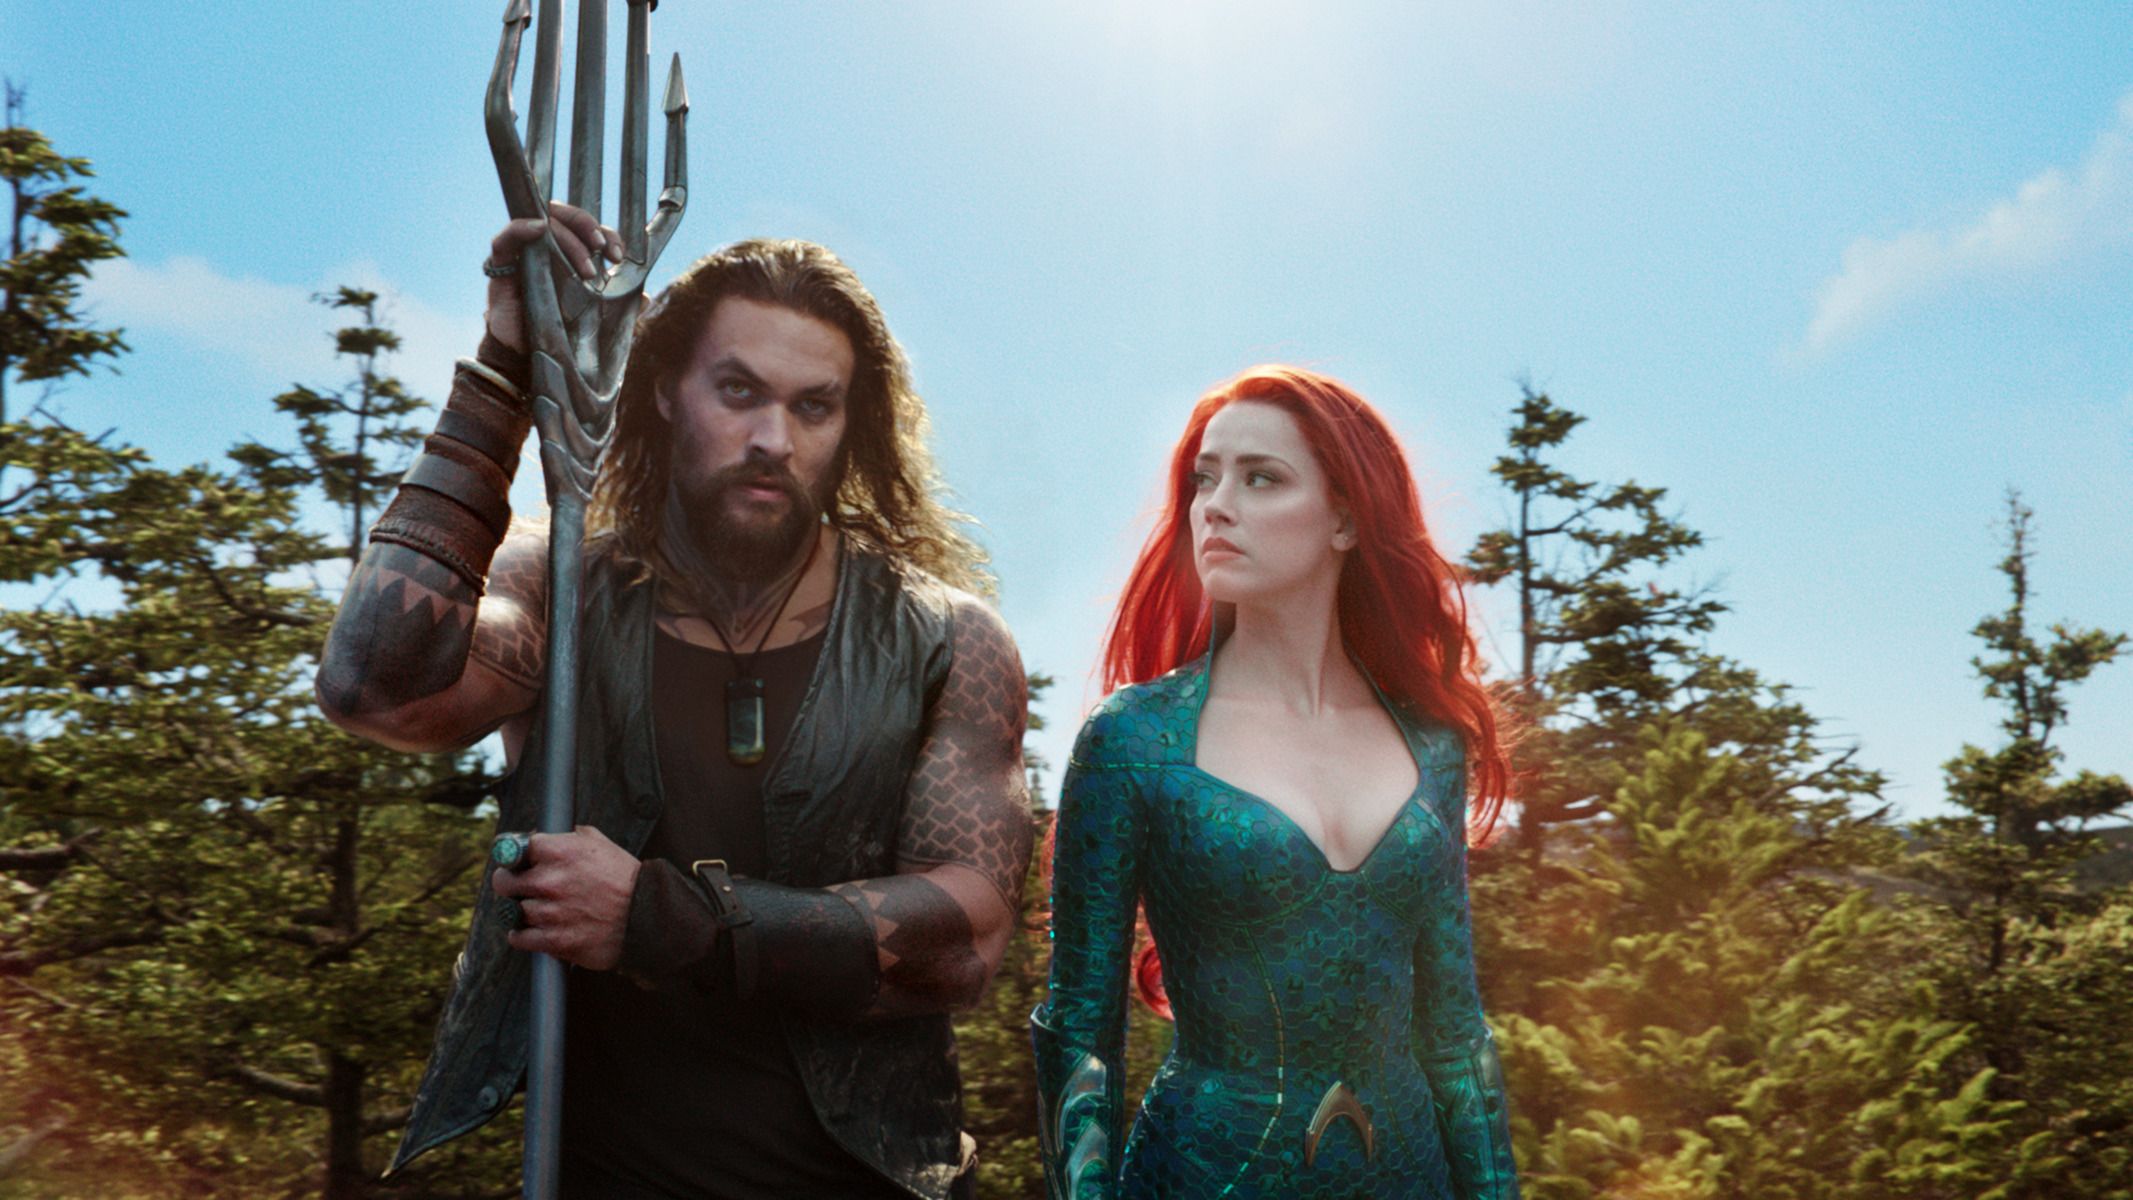 Aquaman Review Aquaman Is Pretty Great If You Ignore The Cgi Hair And The General Plot